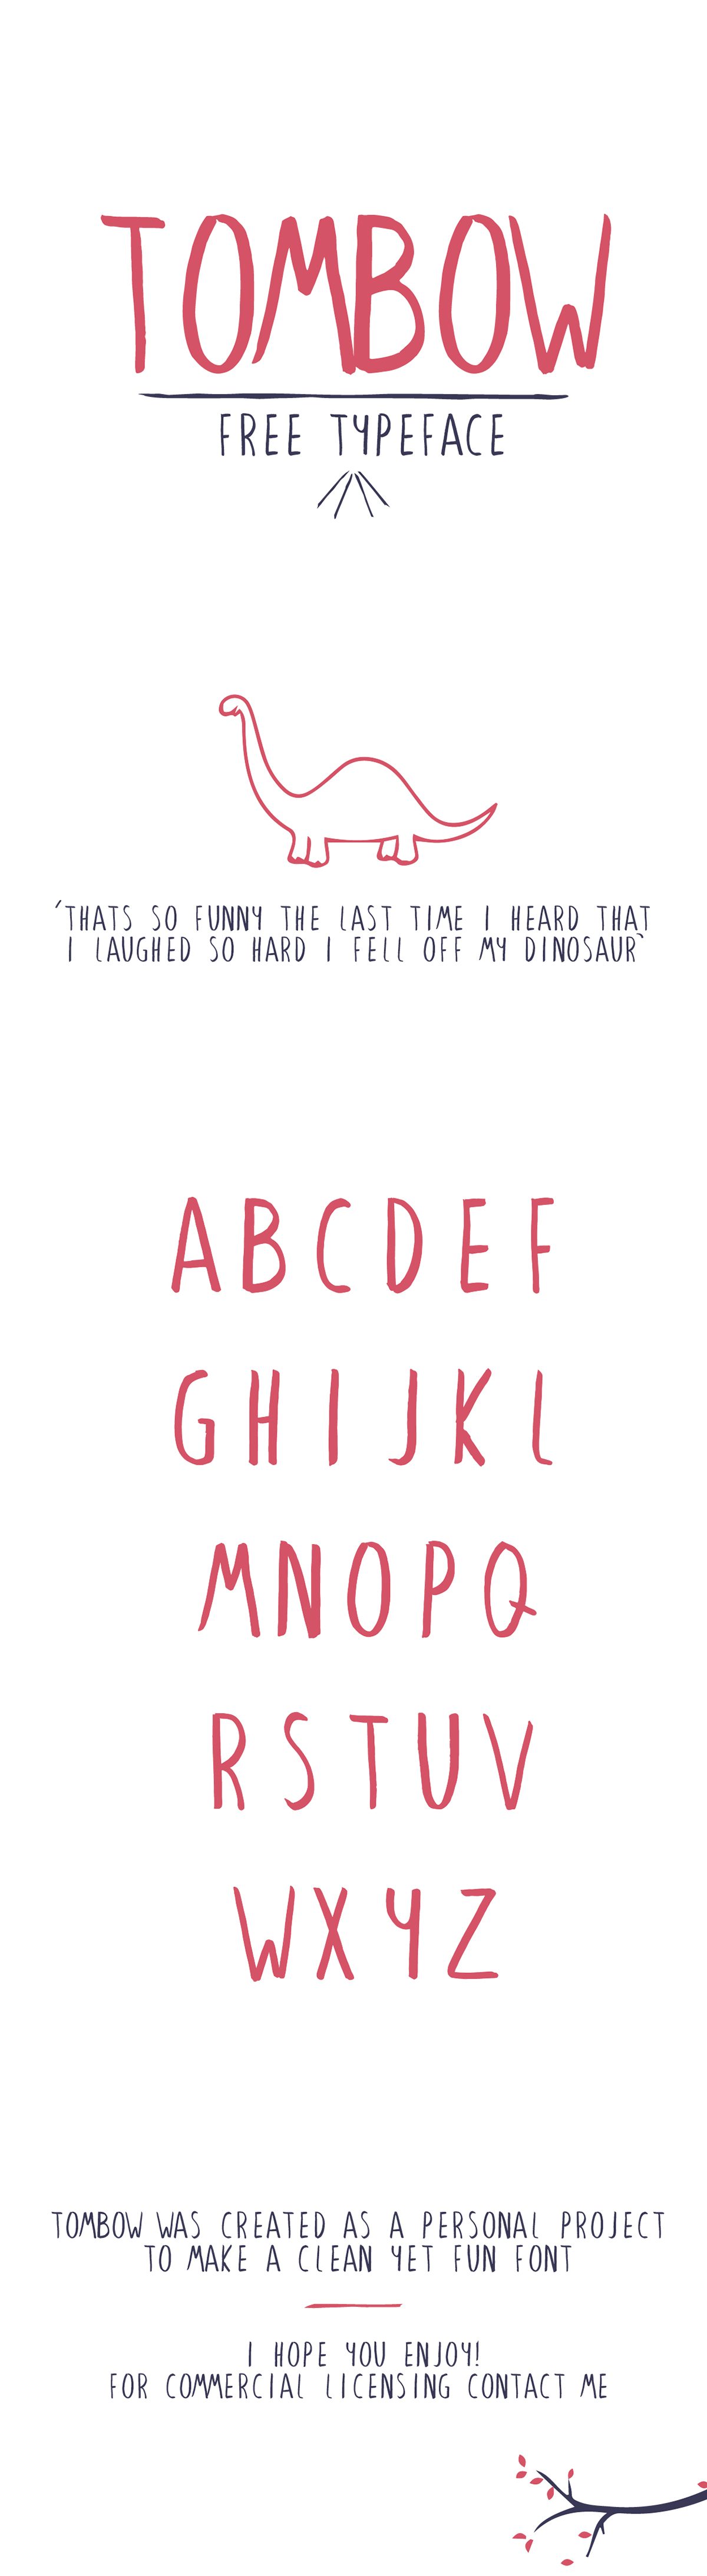 tombow font